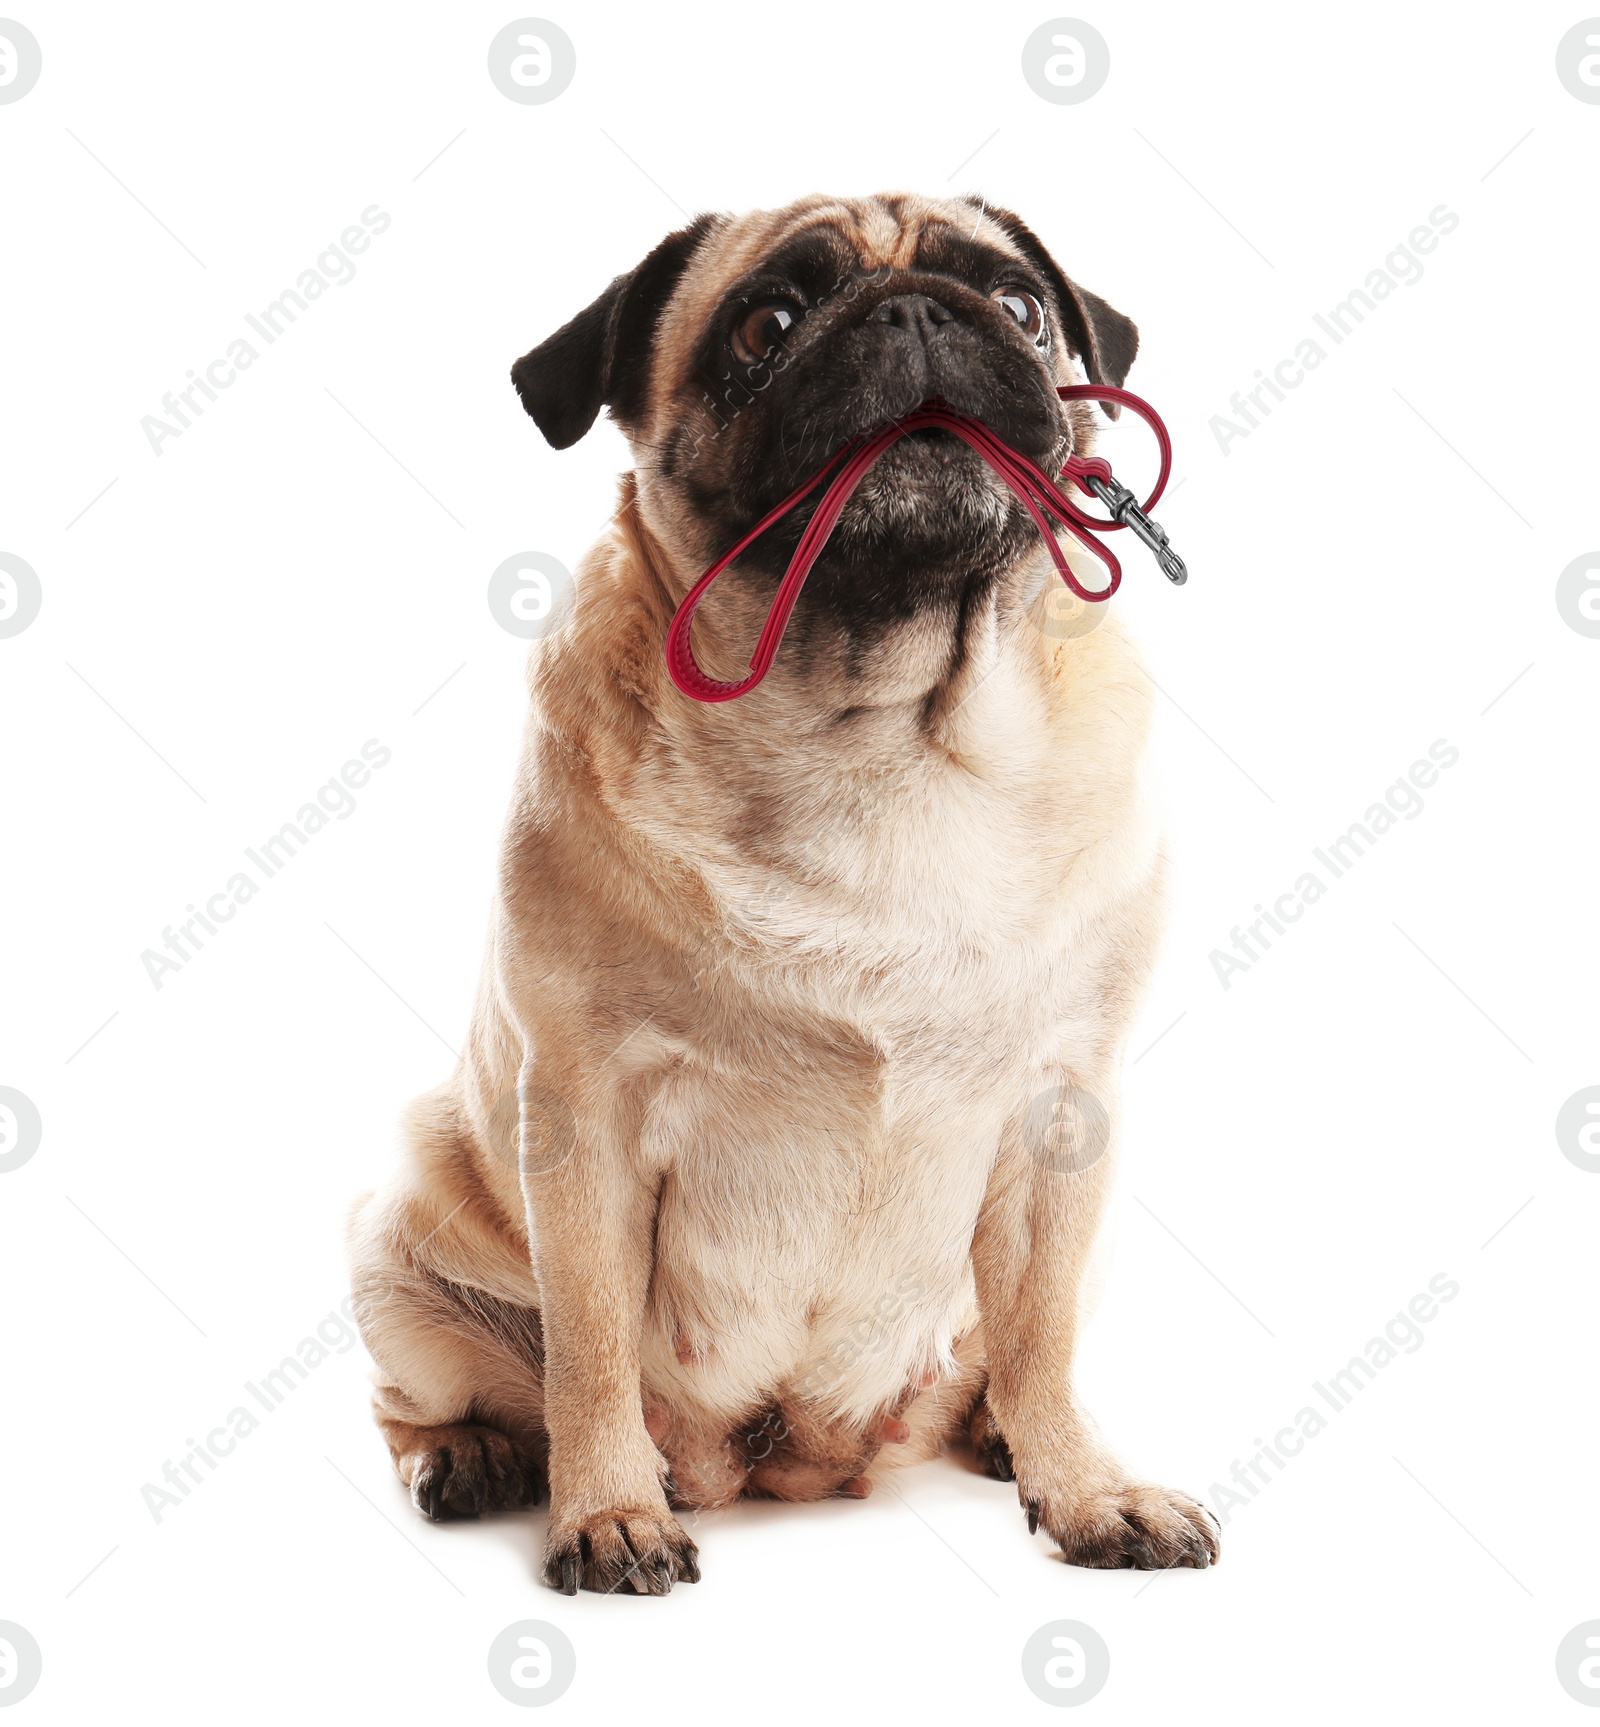 Image of Cute pug dog holding leash in mouth on white background